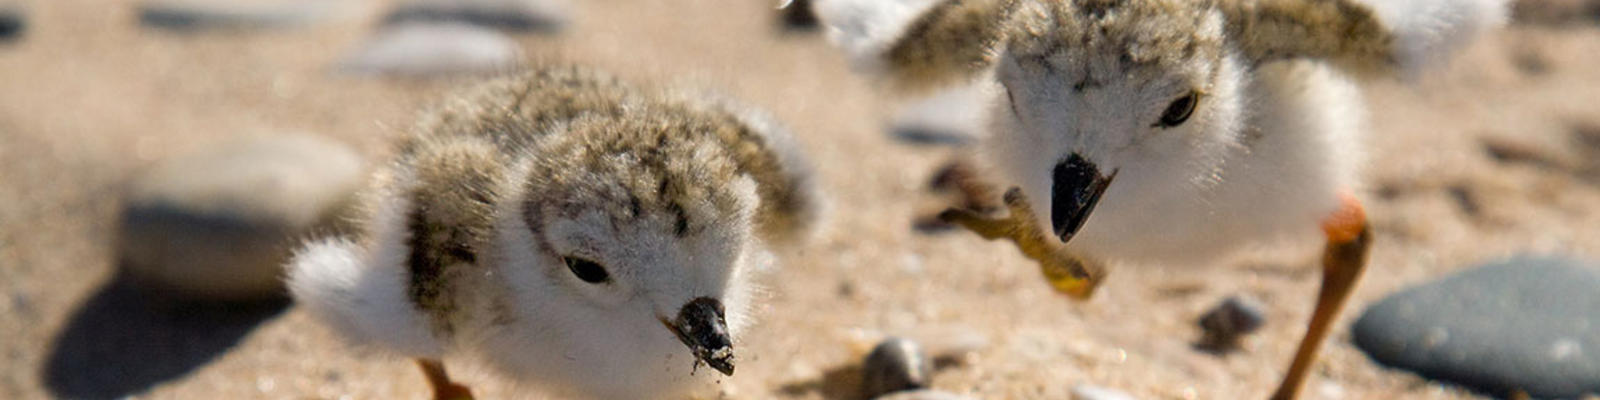 Piping plover chicks on the beach.  